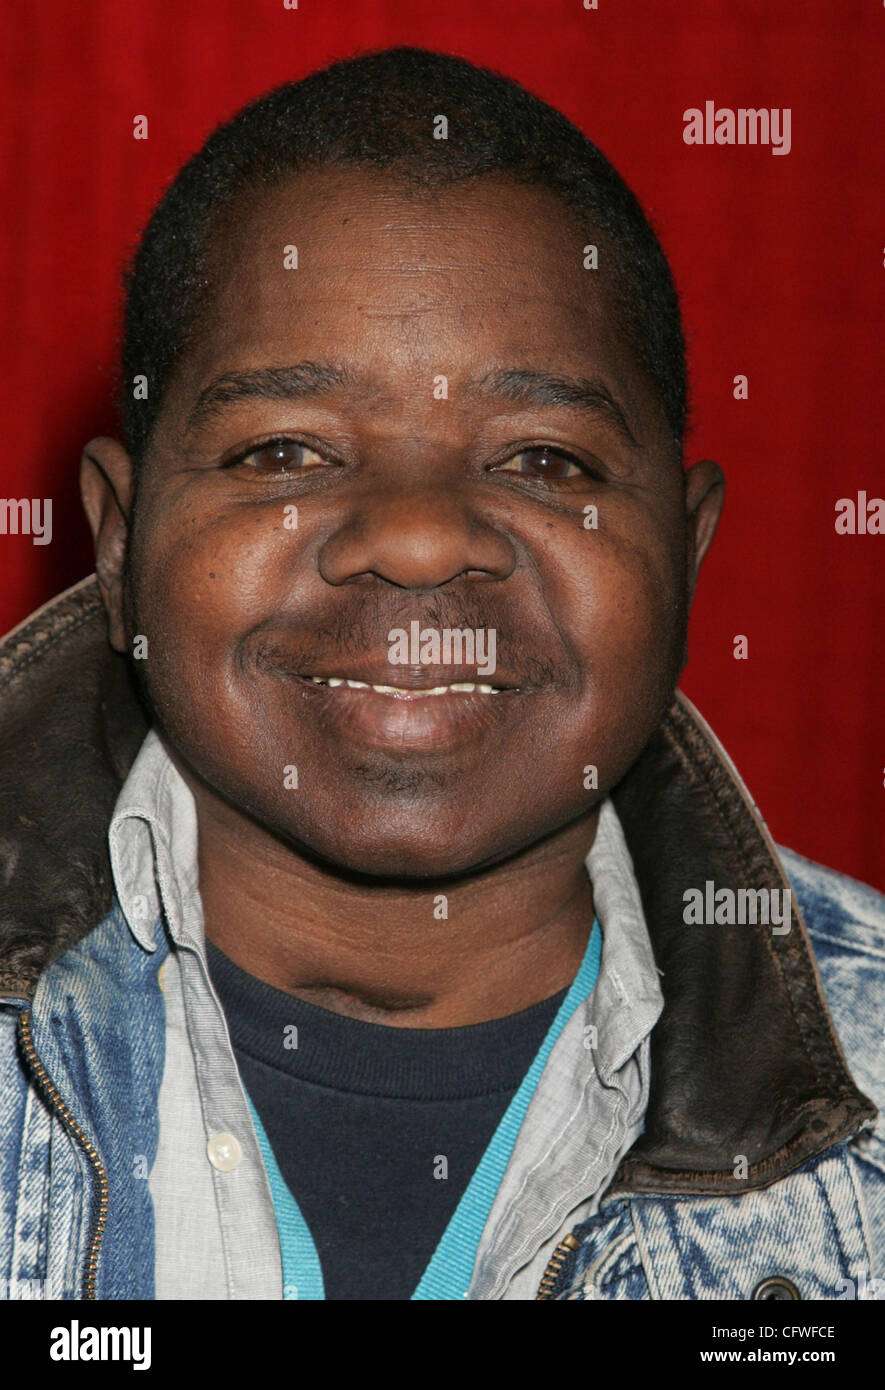 May 28, 2010 - Provo, Utah, U.S. - GARY COLEMAN was hospitalized Wednesday May 26th after falling and suffering a head injury at his home south of Salt Lake City, according to family members. He died Friday at age 42. The diminutive actor was best known for his role on TV's Diff'rent Strokes. He pla Stock Photo